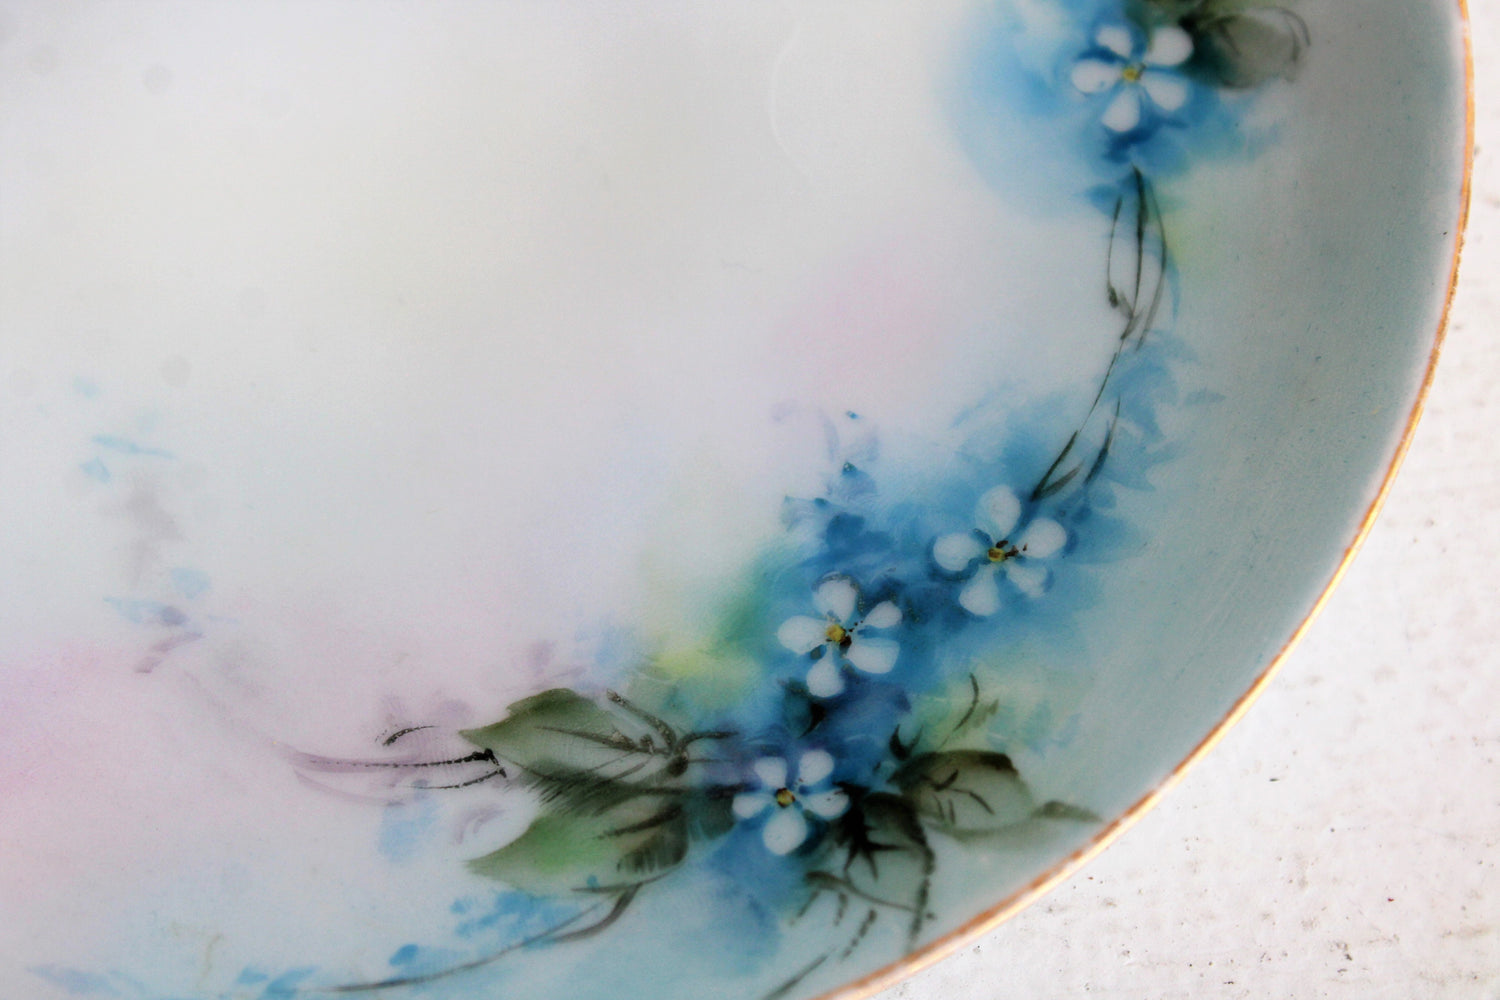 Vintage 1910s 1920s Thomas Sevres Bavaria Small Floral Plate